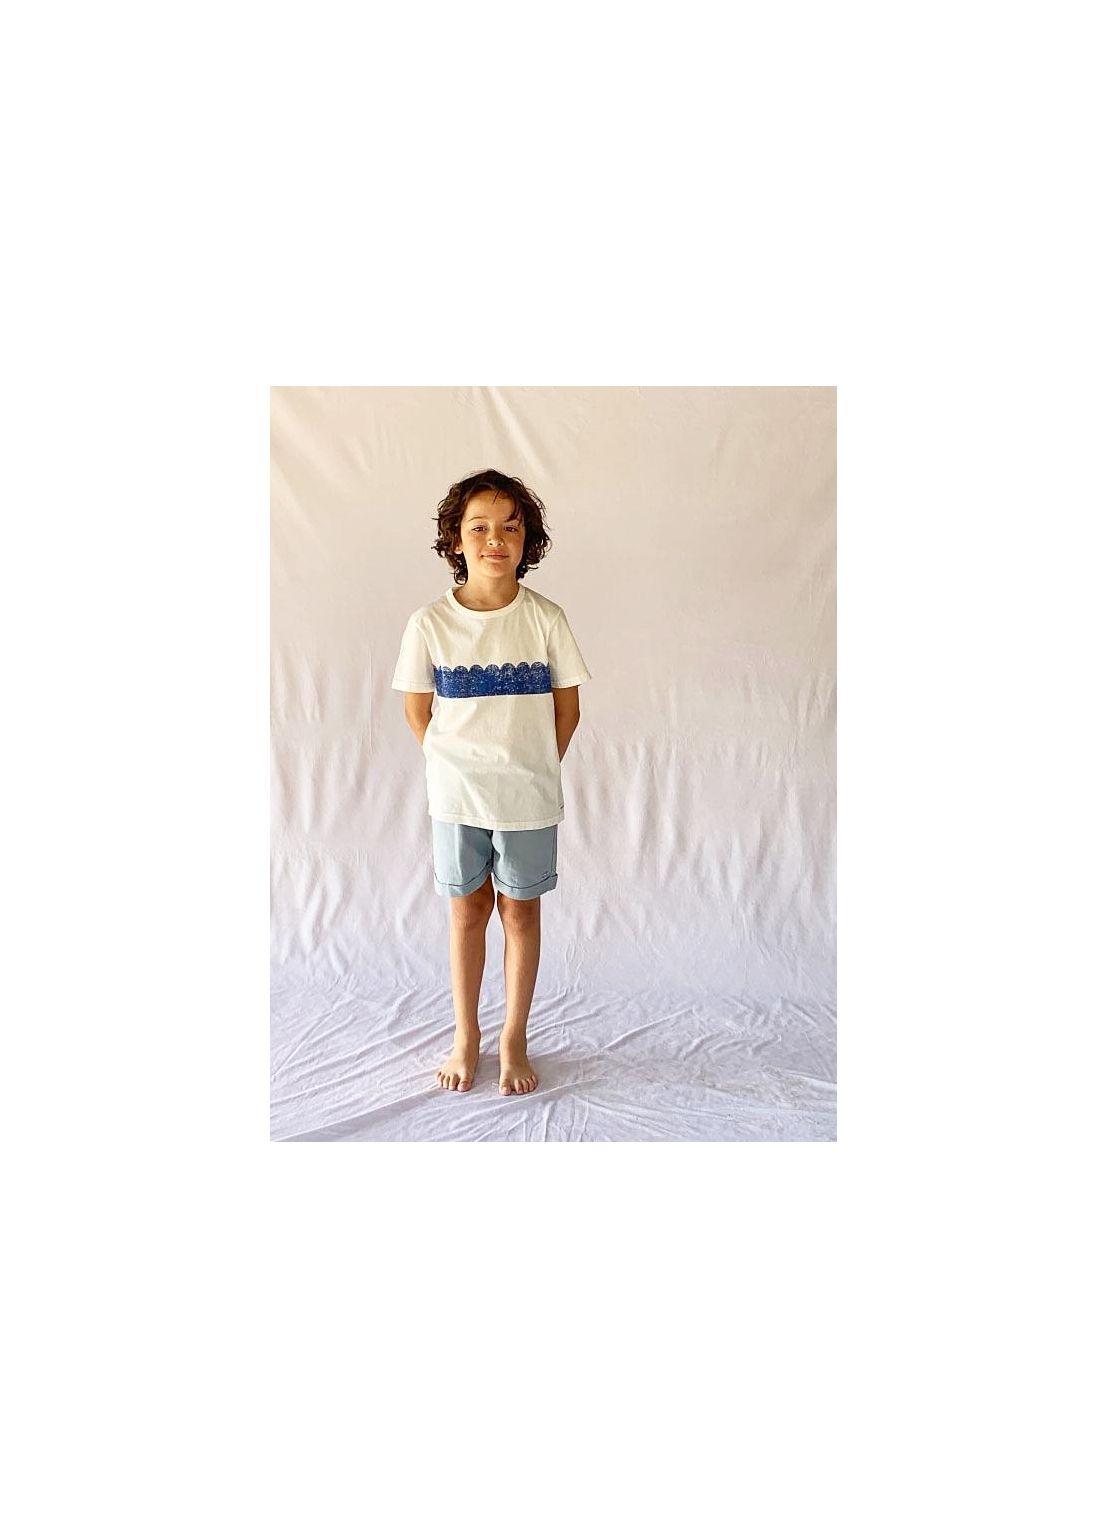 Kid T-SHIRT Unisex-100% Cotton-Knitted